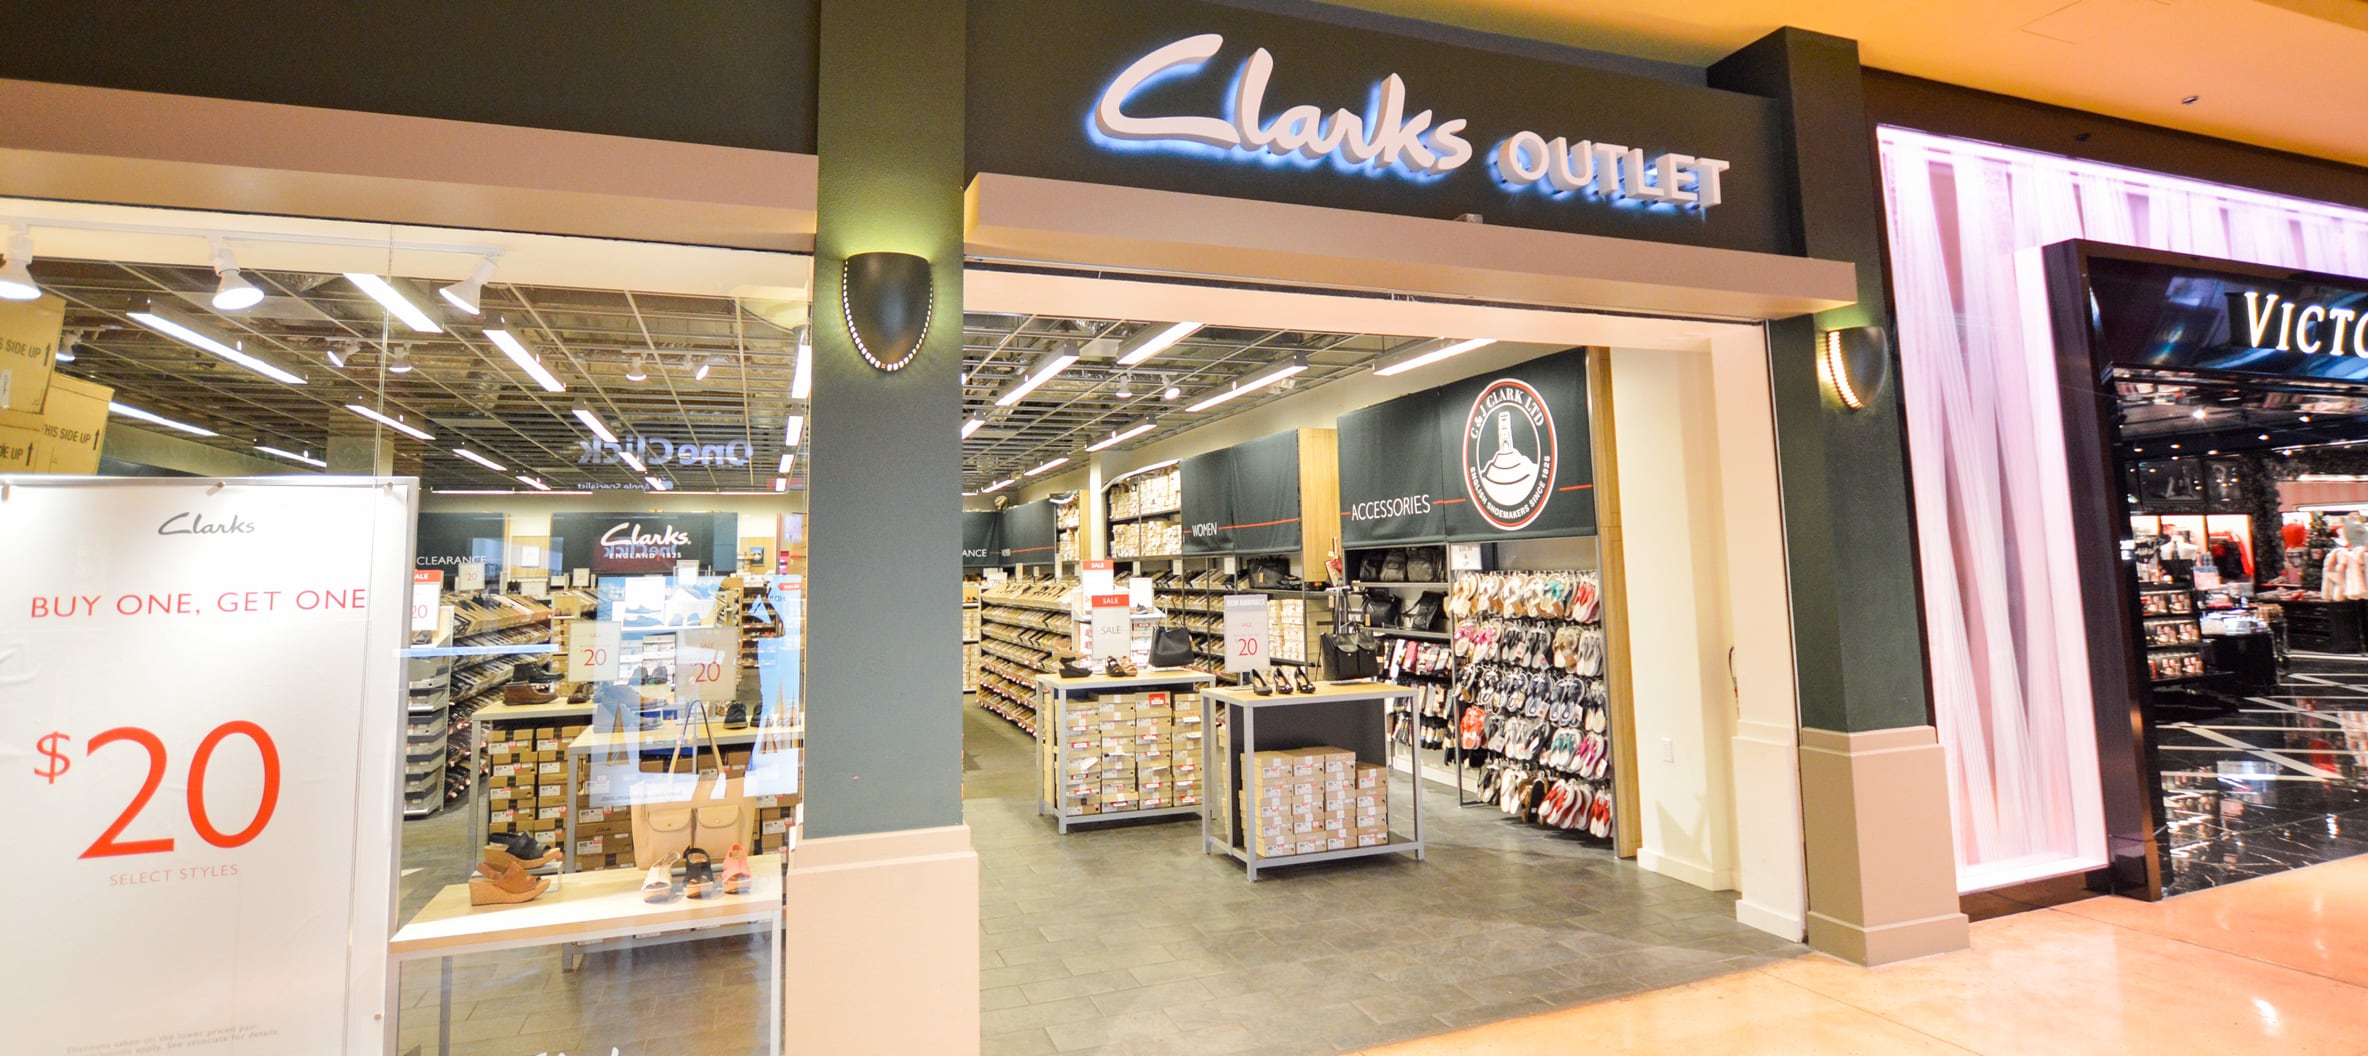 clarks store in miami cheap online